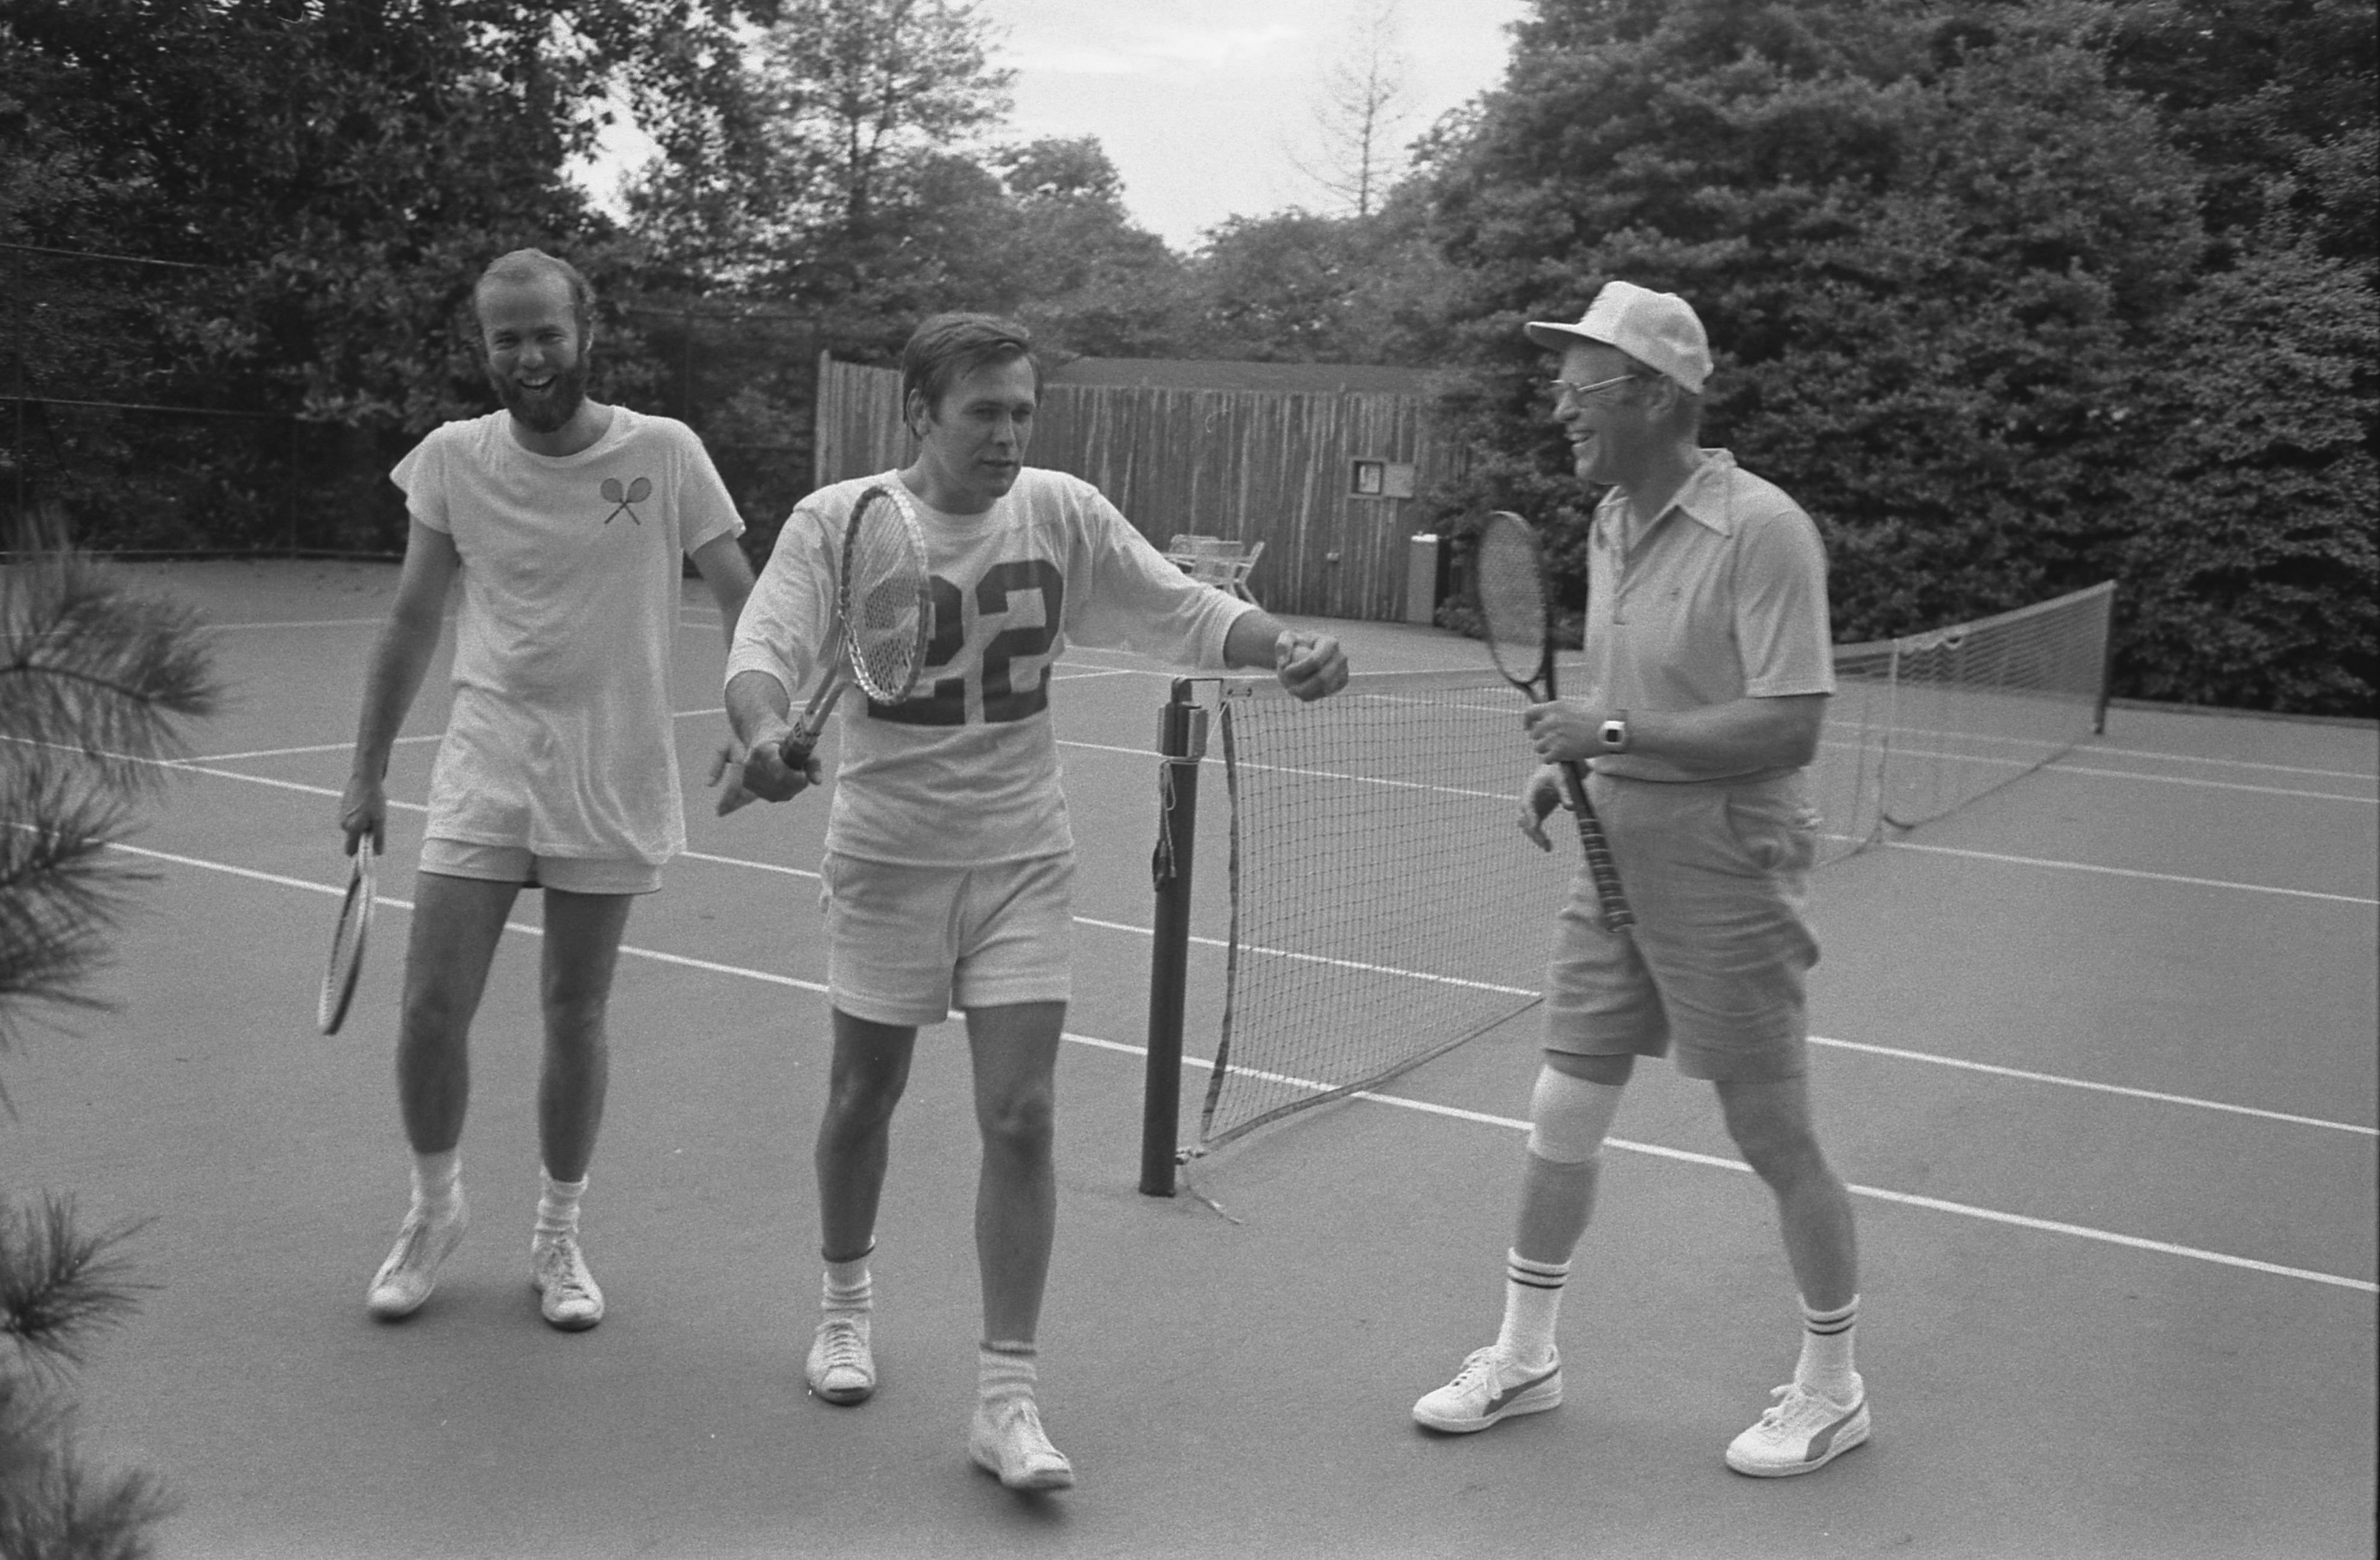 President Ford, Chief of Staff Donald Rumsfeld, and David Kennerly, Personal Photographer to the President, following a tennis match on the White House Tennis Courts.  (not shown Deputy Press Secretary Bill Greener, Jr.) 